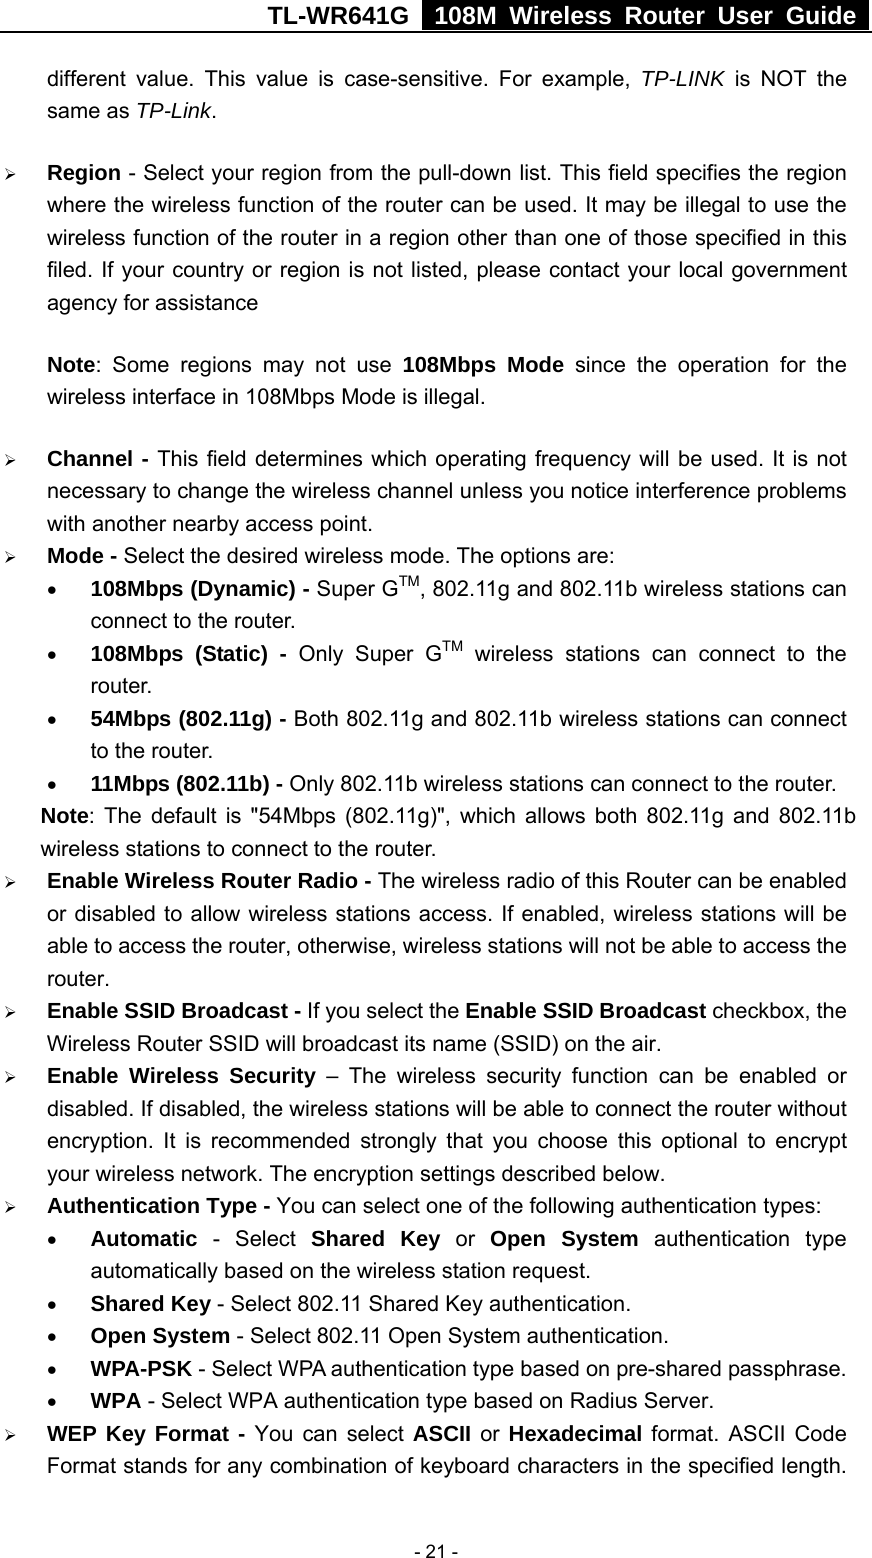 TL-WR641G   108M Wireless Router User Guide   - 21 -different value. This value is case-sensitive. For example, TP-LINK is NOT the same as TP-Link. ¾ Region - Select your region from the pull-down list. This field specifies the region where the wireless function of the router can be used. It may be illegal to use the wireless function of the router in a region other than one of those specified in this filed. If your country or region is not listed, please contact your local government agency for assistance Note: Some regions may not use 108Mbps Mode since the operation for the wireless interface in 108Mbps Mode is illegal. ¾ Channel - This field determines which operating frequency will be used. It is not necessary to change the wireless channel unless you notice interference problems with another nearby access point. ¾ Mode - Select the desired wireless mode. The options are:   • 108Mbps (Dynamic) - Super GTM, 802.11g and 802.11b wireless stations can connect to the router. • 108Mbps (Static) - Only Super GTM wireless stations can connect to the router. • 54Mbps (802.11g) - Both 802.11g and 802.11b wireless stations can connect to the router. • 11Mbps (802.11b) - Only 802.11b wireless stations can connect to the router. Note: The default is &quot;54Mbps (802.11g)&quot;, which allows both 802.11g and 802.11b wireless stations to connect to the router. ¾ Enable Wireless Router Radio - The wireless radio of this Router can be enabled or disabled to allow wireless stations access. If enabled, wireless stations will be able to access the router, otherwise, wireless stations will not be able to access the router. ¾ Enable SSID Broadcast - If you select the Enable SSID Broadcast checkbox, the Wireless Router SSID will broadcast its name (SSID) on the air. ¾ Enable Wireless Security – The wireless security function can be enabled or disabled. If disabled, the wireless stations will be able to connect the router without encryption. It is recommended strongly that you choose this optional to encrypt your wireless network. The encryption settings described below. ¾ Authentication Type - You can select one of the following authentication types: • Automatic - Select Shared Key or Open System authentication type automatically based on the wireless station request. • Shared Key - Select 802.11 Shared Key authentication. • Open System - Select 802.11 Open System authentication.   • WPA-PSK - Select WPA authentication type based on pre-shared passphrase.   • WPA - Select WPA authentication type based on Radius Server. ¾ WEP Key Format - You can select ASCII or  Hexadecimal format. ASCII Code Format stands for any combination of keyboard characters in the specified length. 